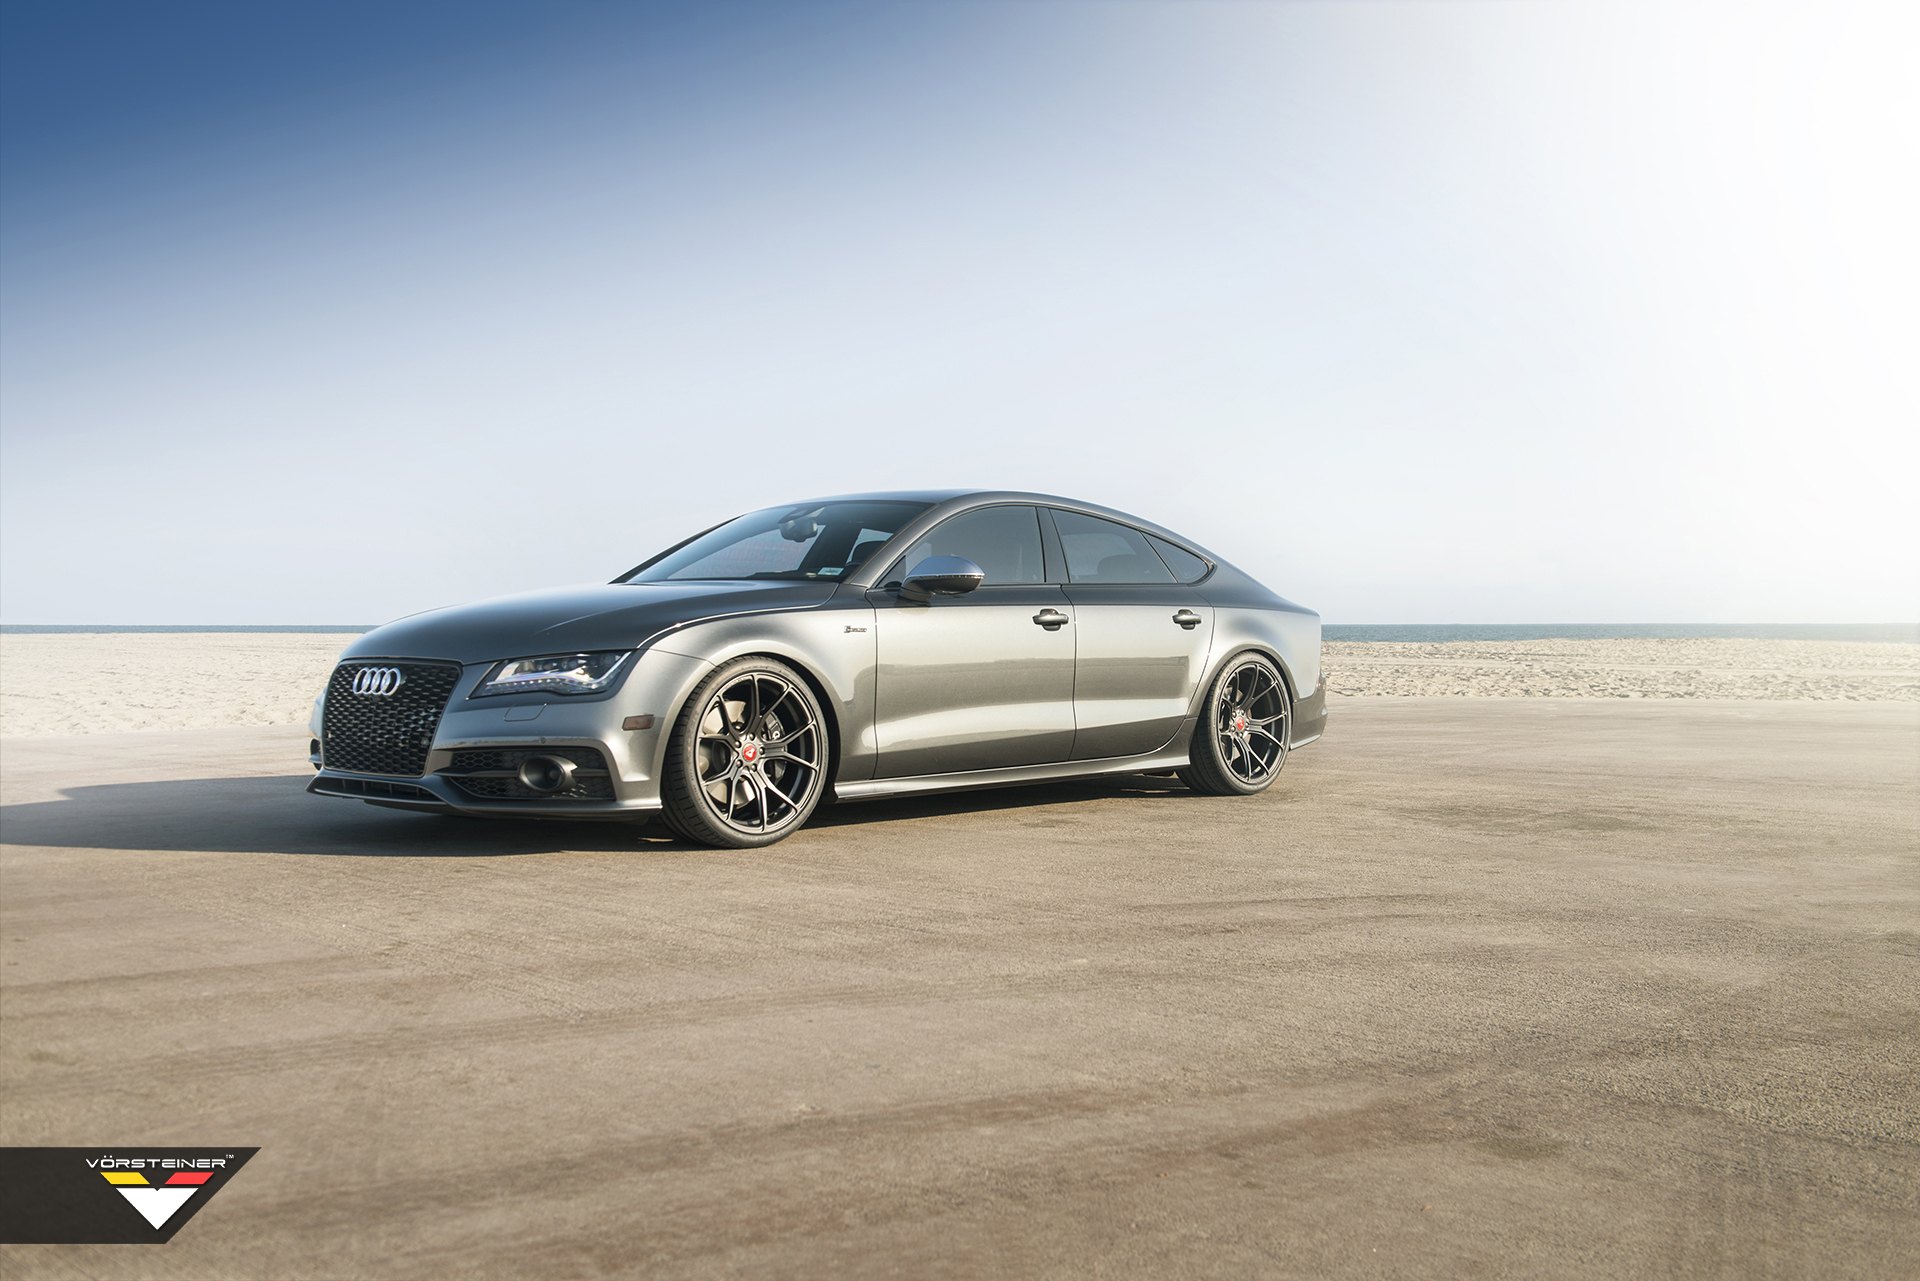 Gray Audi A7 with Aftermarket LED Headlights - Photo by Vorstiner